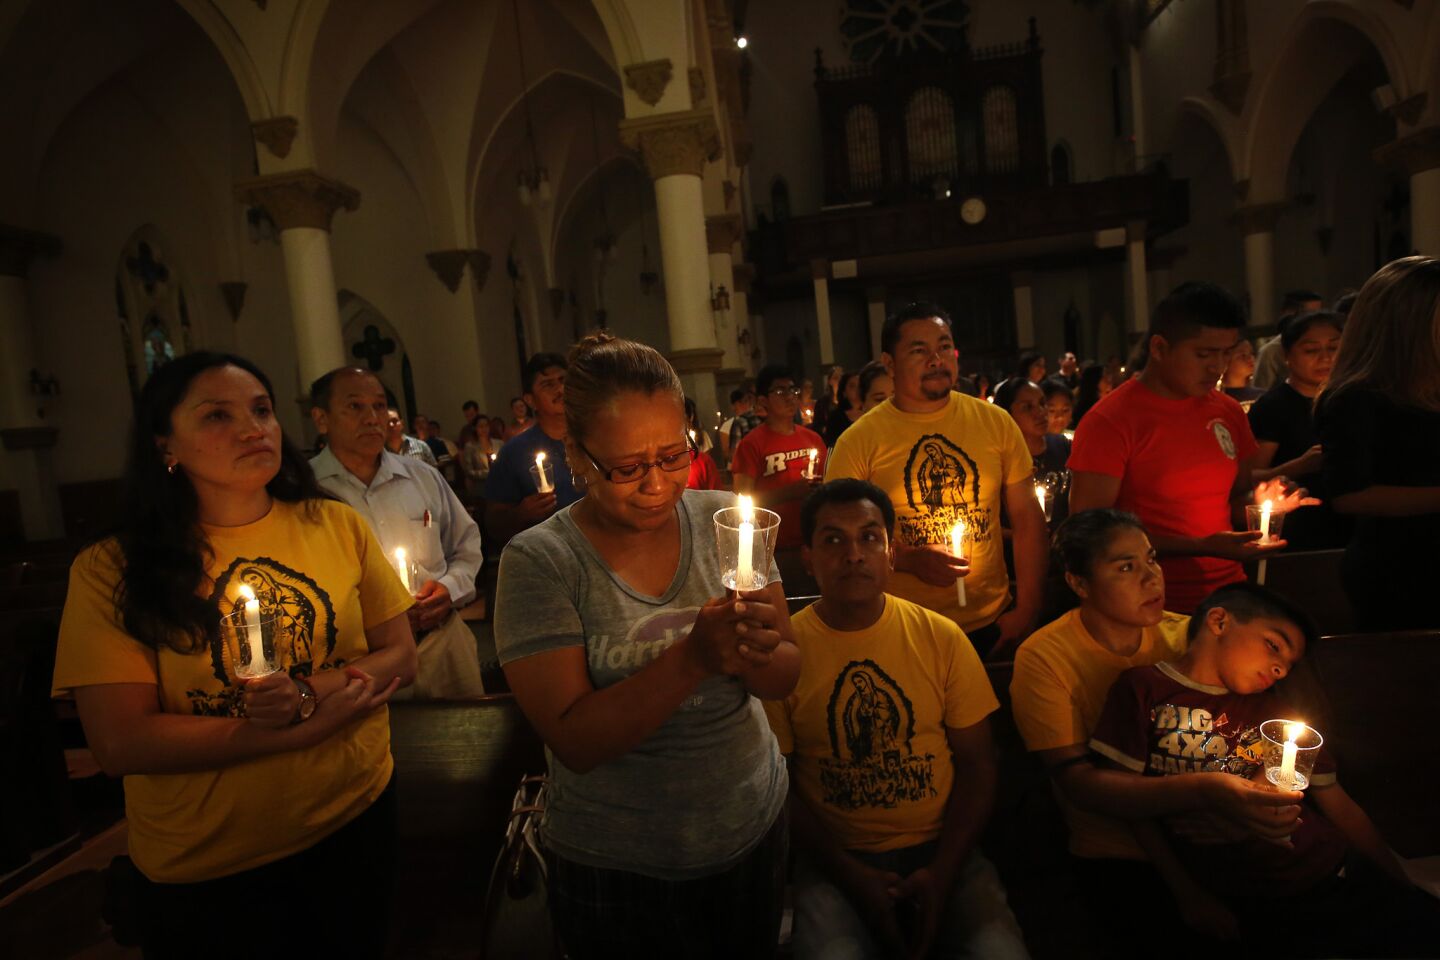 Dallas residents join in a "United to Heal" prayer vigil at the Cathedral Guadalupe the day after the sniper attack that left five officers dead.